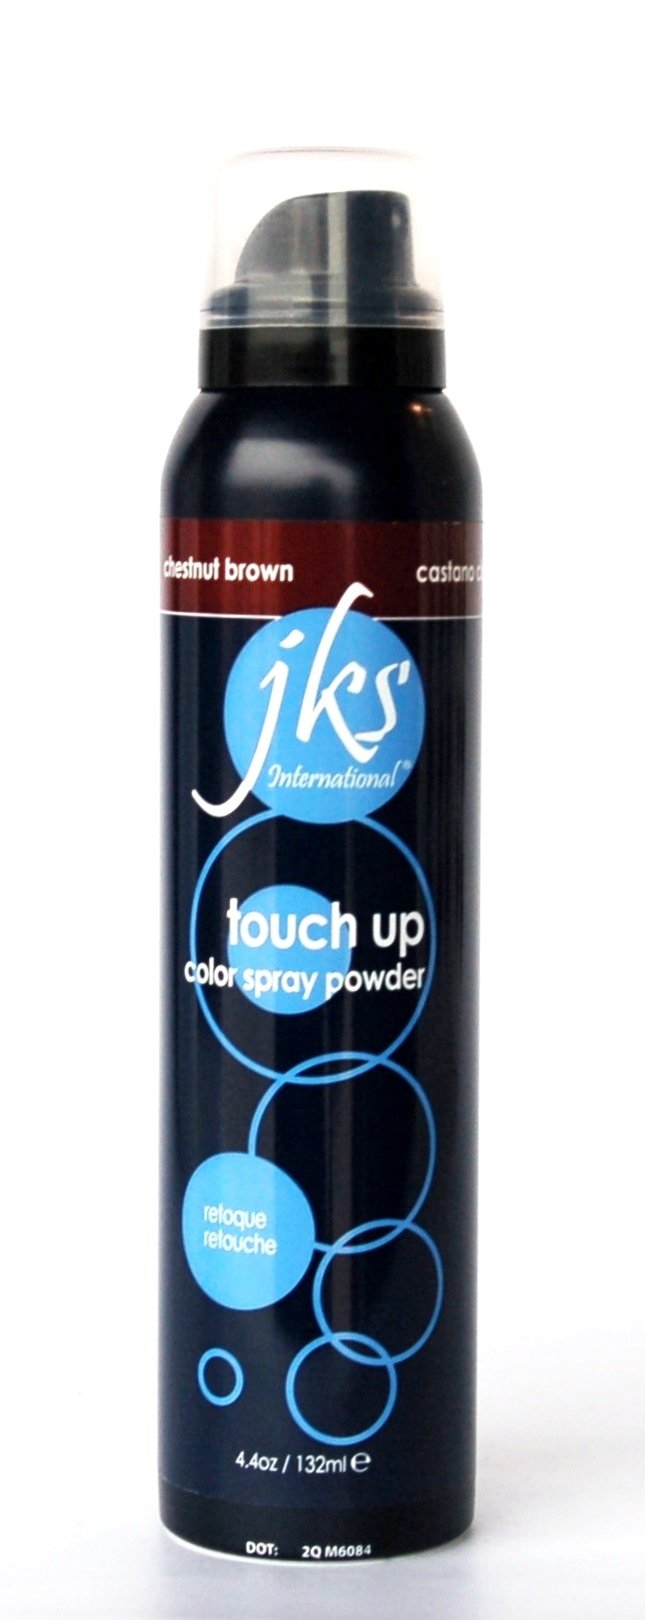 Touch up spray CHESNUT BROWN, Hair color spray, Quick and Easy Touch Up your roots, comes out with one shampoo, Great emergency tool in between hair coloring. The perfect shades by Famous Hair Stylist